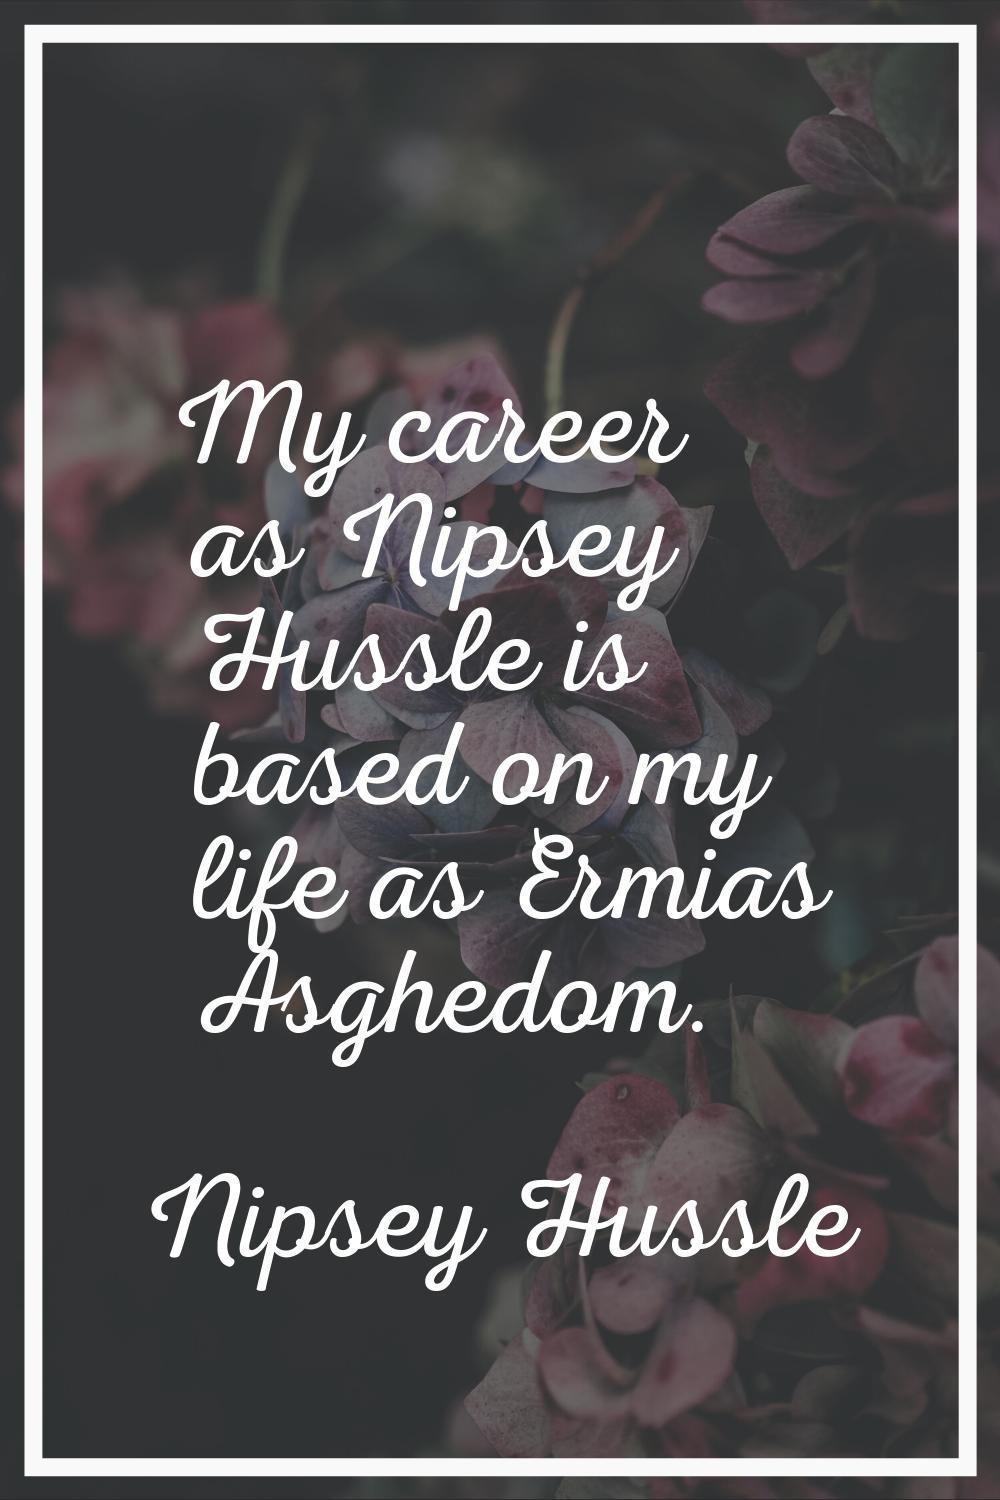 My career as Nipsey Hussle is based on my life as Ermias Asghedom.